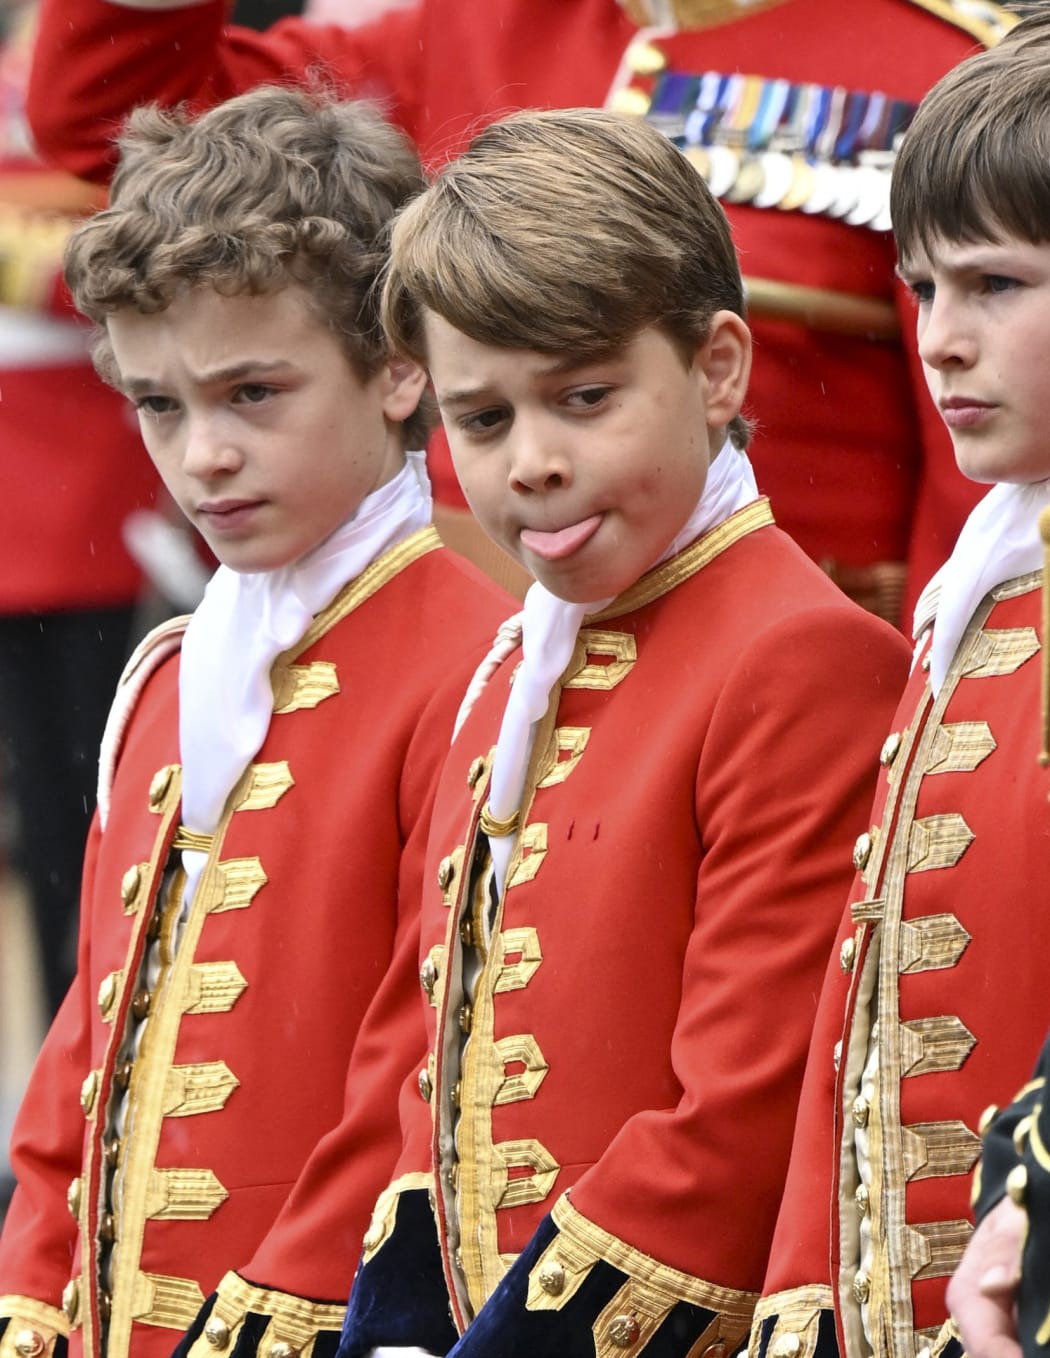 Britain's Prince George of Wales (C) stands at Westminster Abbey in central London on May 6, 2023, ahead of the coronations of Britain's King Charles III and Britain's Camilla, Queen Consort. - The set-piece coronation is the first in Britain in 70 years, and only the second in history to be televised. Charles will be the 40th reigning monarch to be crowned at the central London church since King William I in 1066. Outside the UK, he is also king of 14 other Commonwealth countries, including Australia, Canada and New Zealand. Camilla, his second wife, will be crowned queen alongside him, and be known as Queen Camilla after the ceremony. (Photo by Andy Stenning / POOL / AFP)